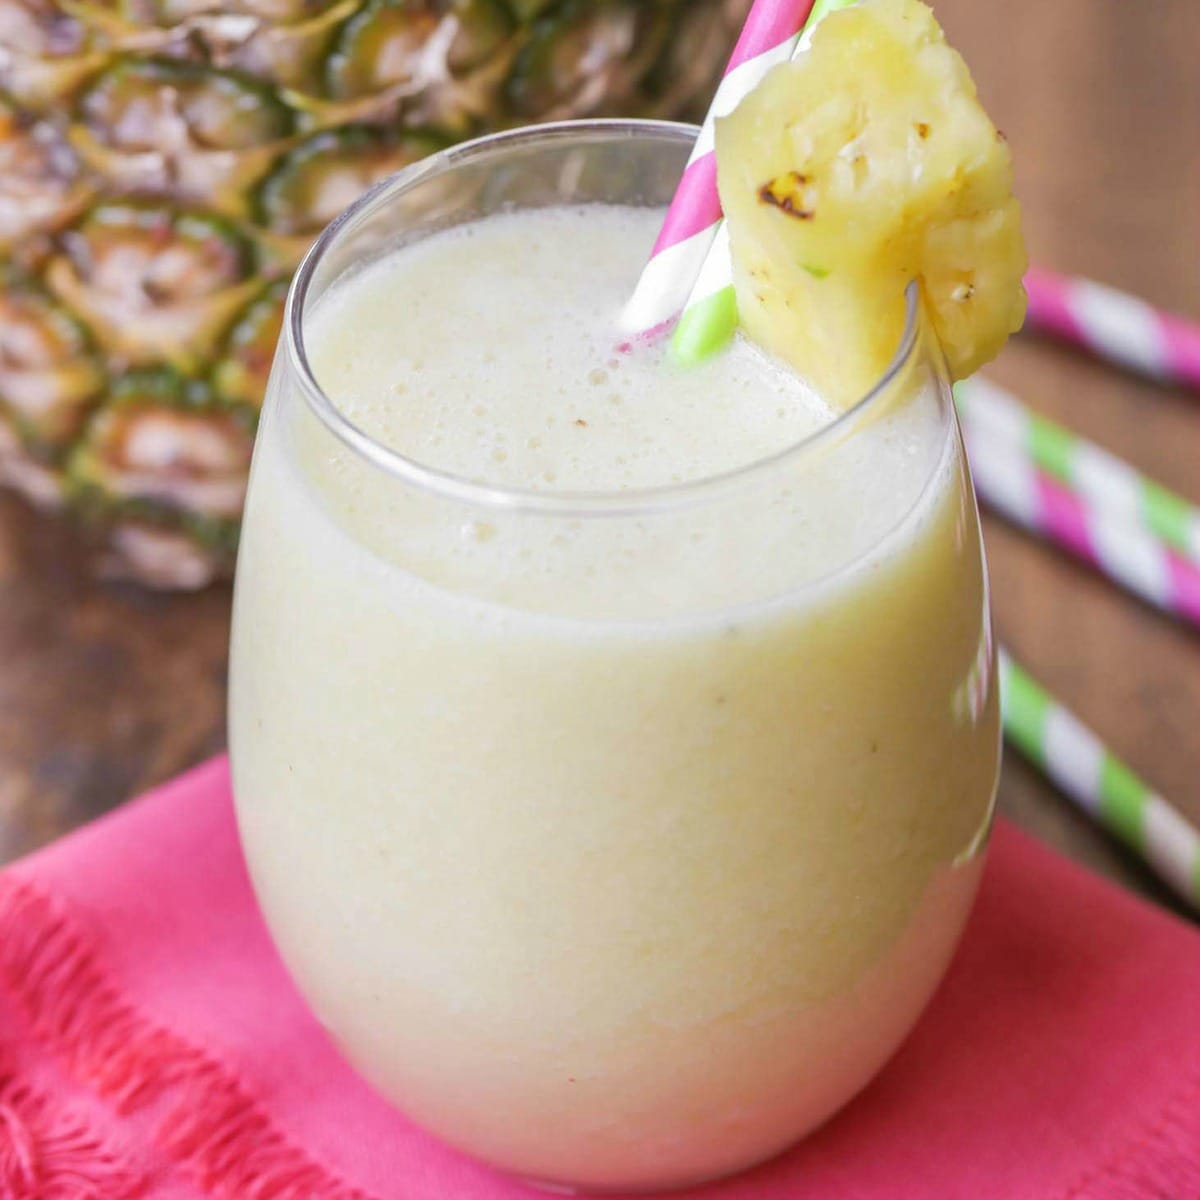 Short glass of Pineapple Banana Smoothie with a pineapple garnish.